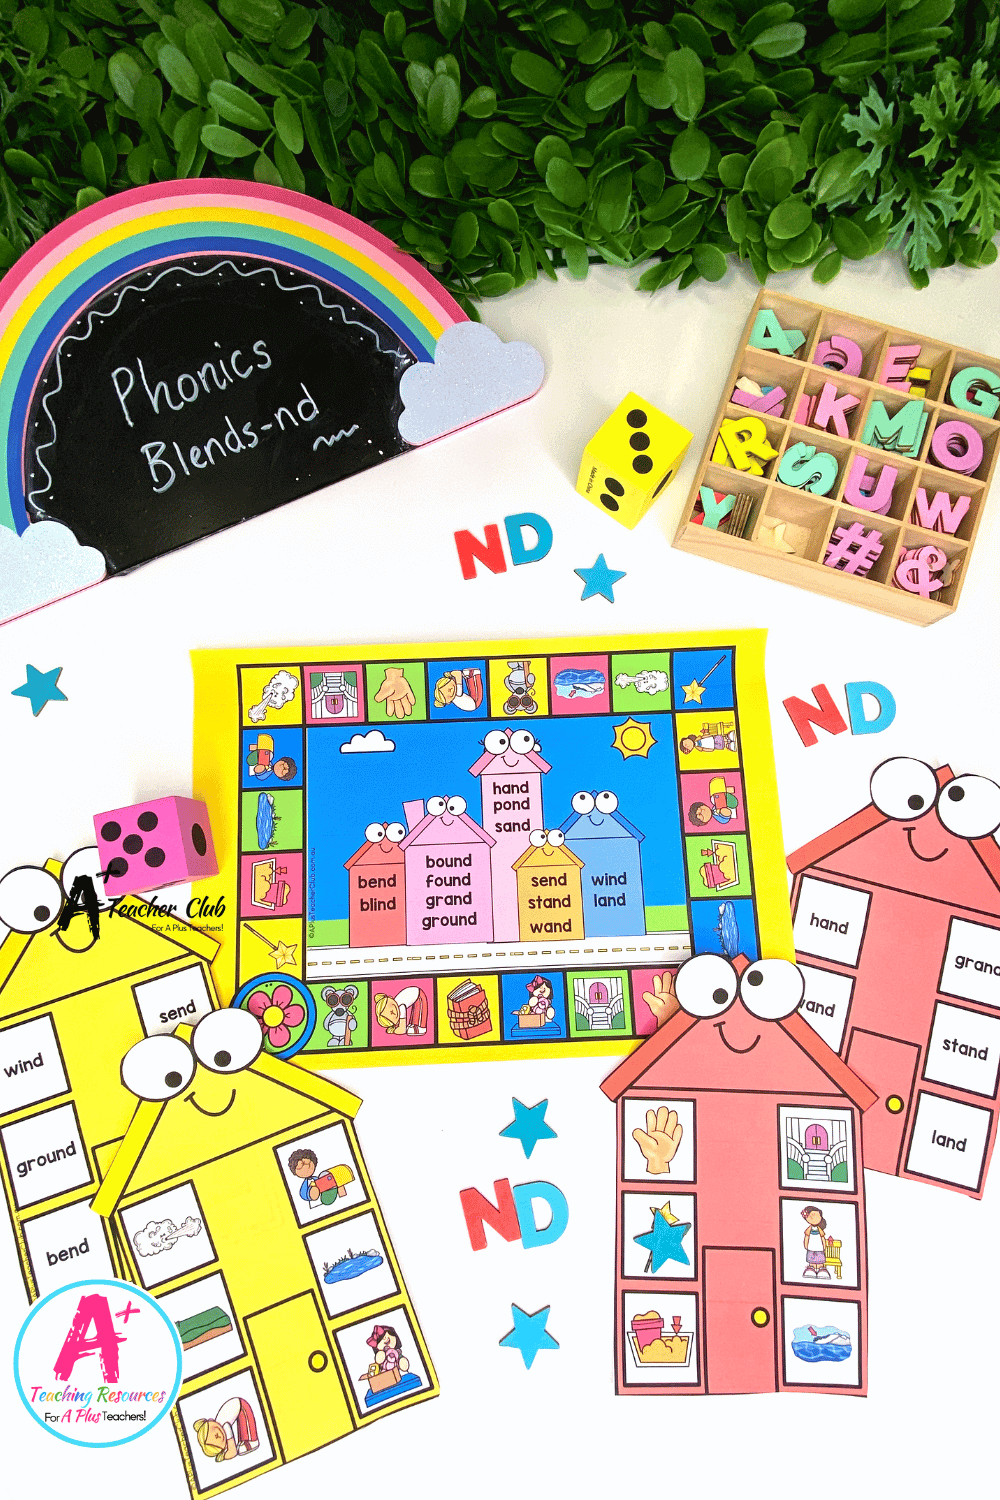 nd Consonant Blends Board Game